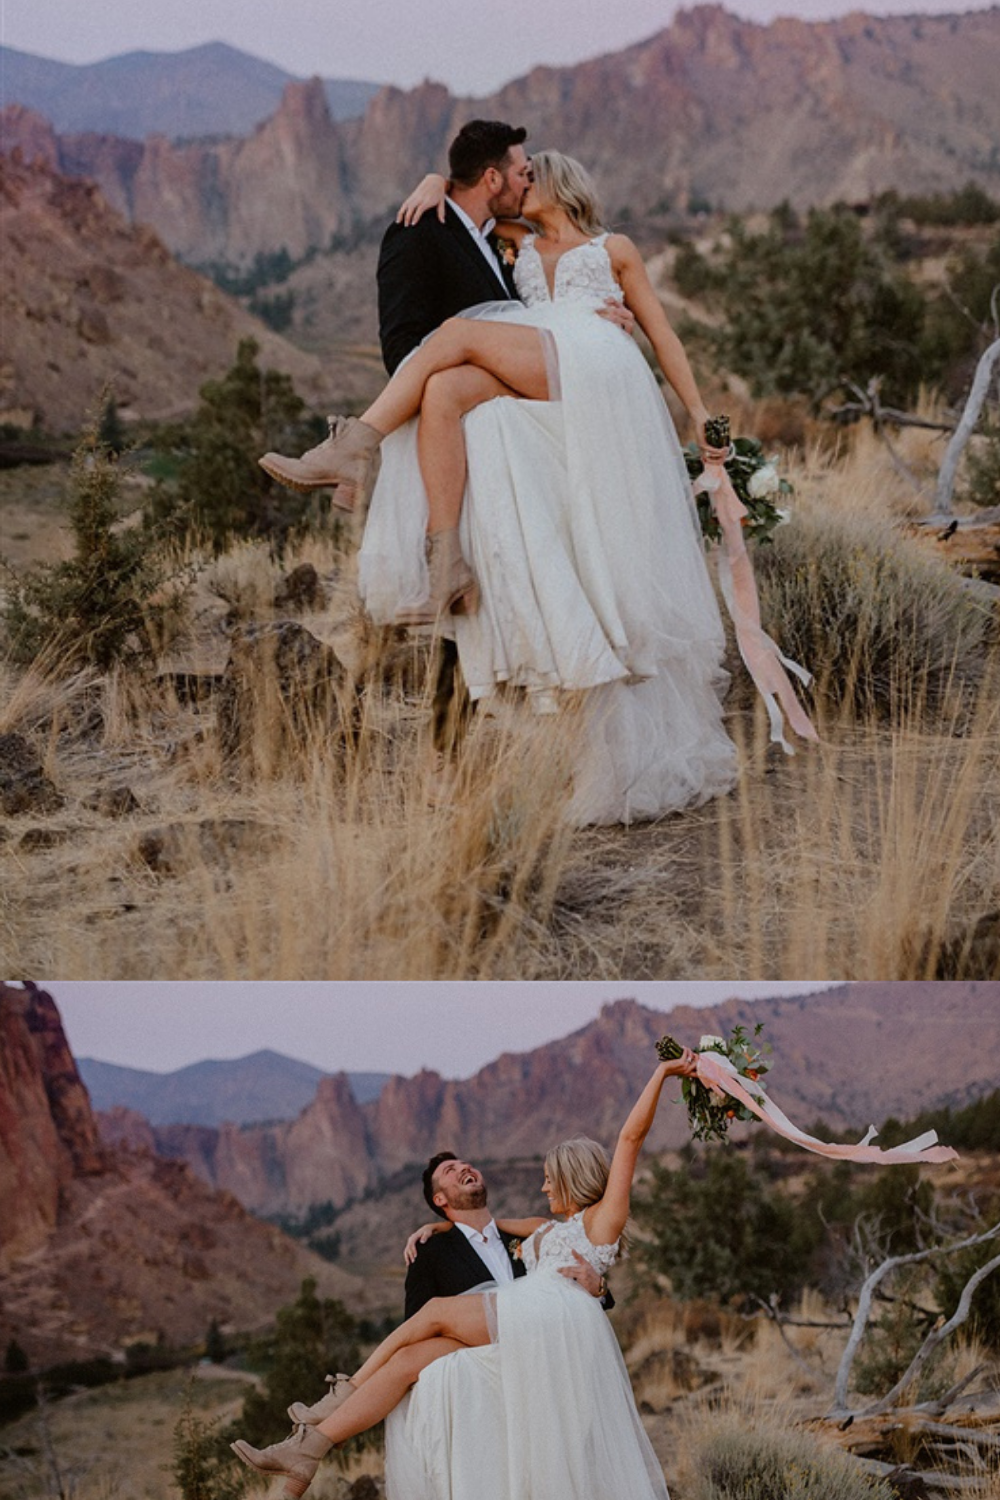 Bride and groom celebrate wedding in Smith Rock state park after their destination Sun River elopement in Oregon Fall wedding photography | Sun River Elopement, Destination Elopement Photographer, Smith Rock Elopement Inspiration, Oregon Elopement ideas, PNW Fall Wedding Inspiration, Fall Outdoor Wedding Ideas,Fall Wedding Inspiration, PNW Outdoor Wedding Ideas | chelseaabril.com